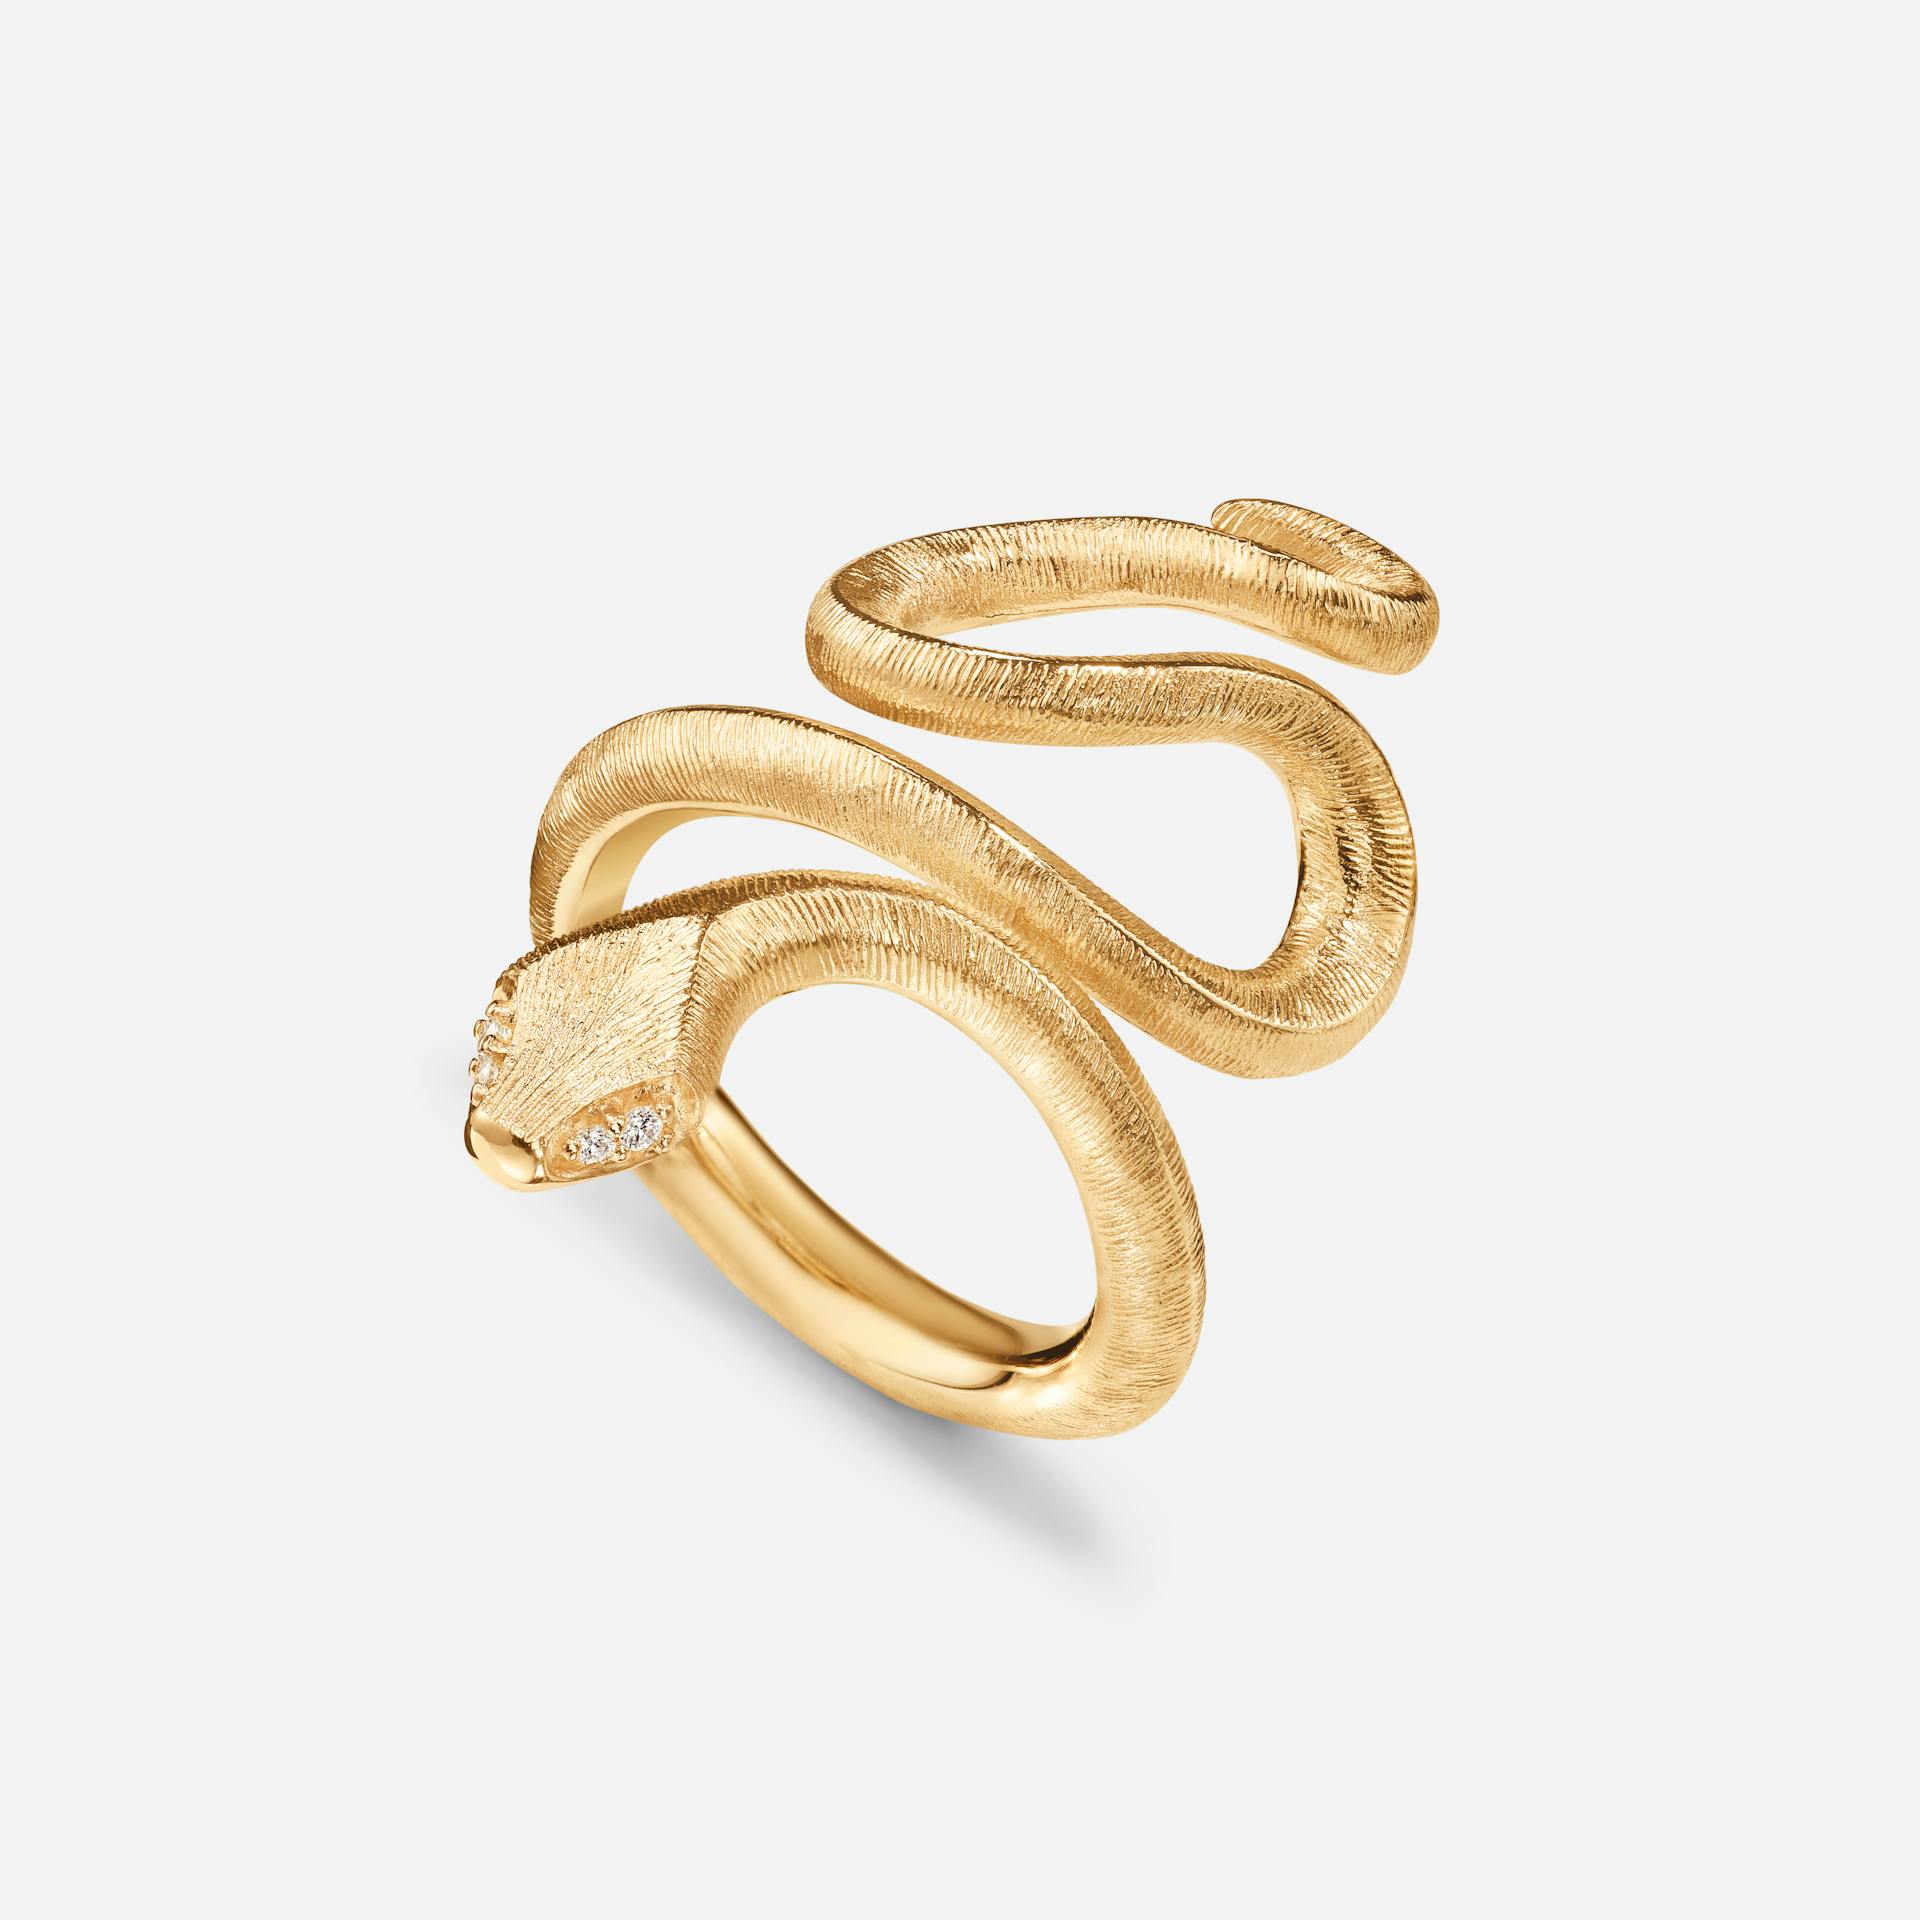 Snakes Ring Medium in Yellow Gold with Diamonds designed by Ole Lynggaard